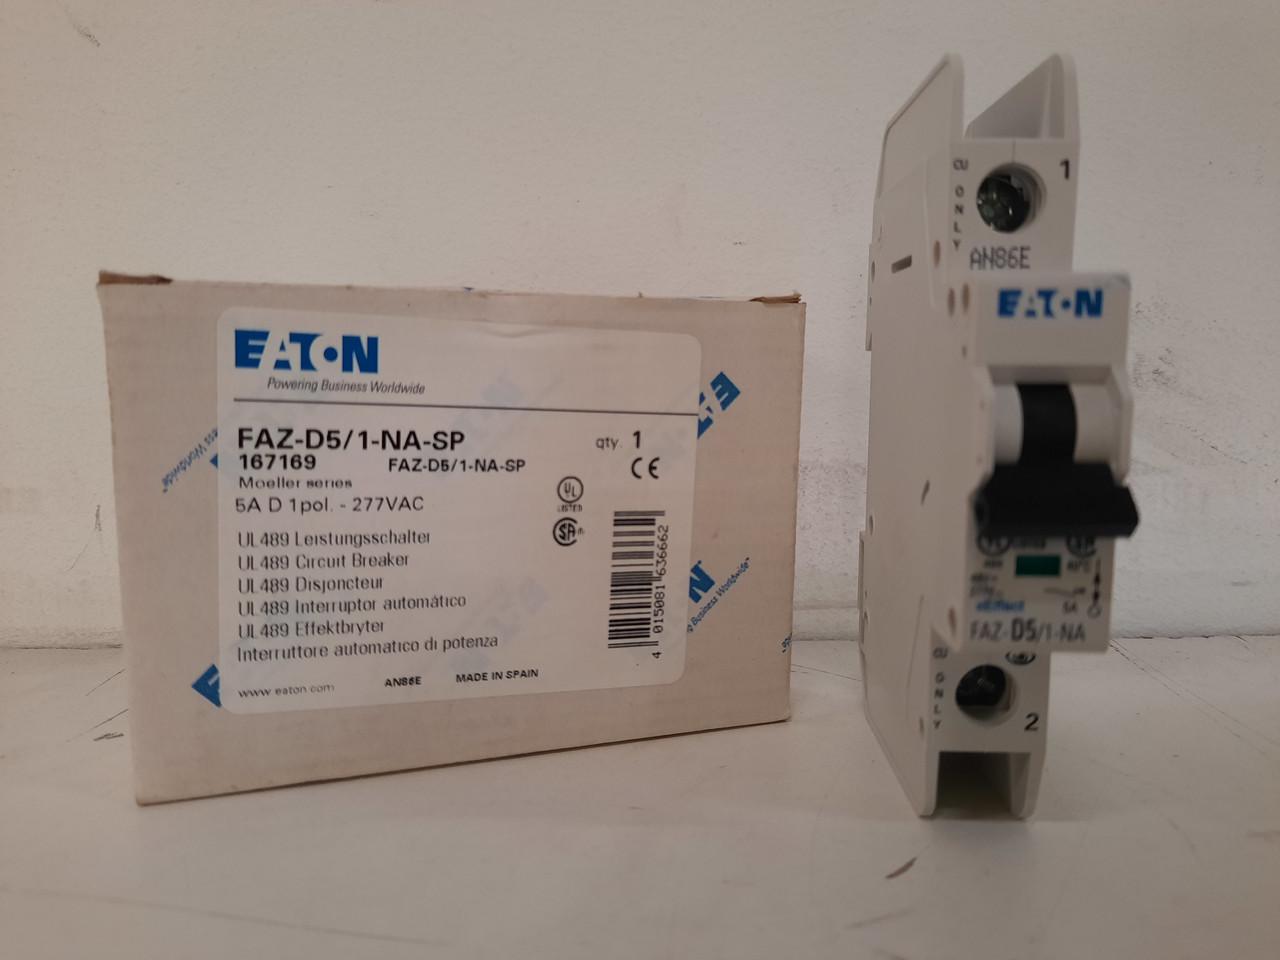 Eaton FAZ-D5/1-NA-SP Eaton FAZ branch protector,UL 489 Industrial miniature circuit breaker - supplementary protector,Single package,High levels of inrush current are expected,5 A,10 kAIC,Single-pole,277 V,10-20X /n,Q38,50-60 Hz,Screw terminals,D Curve